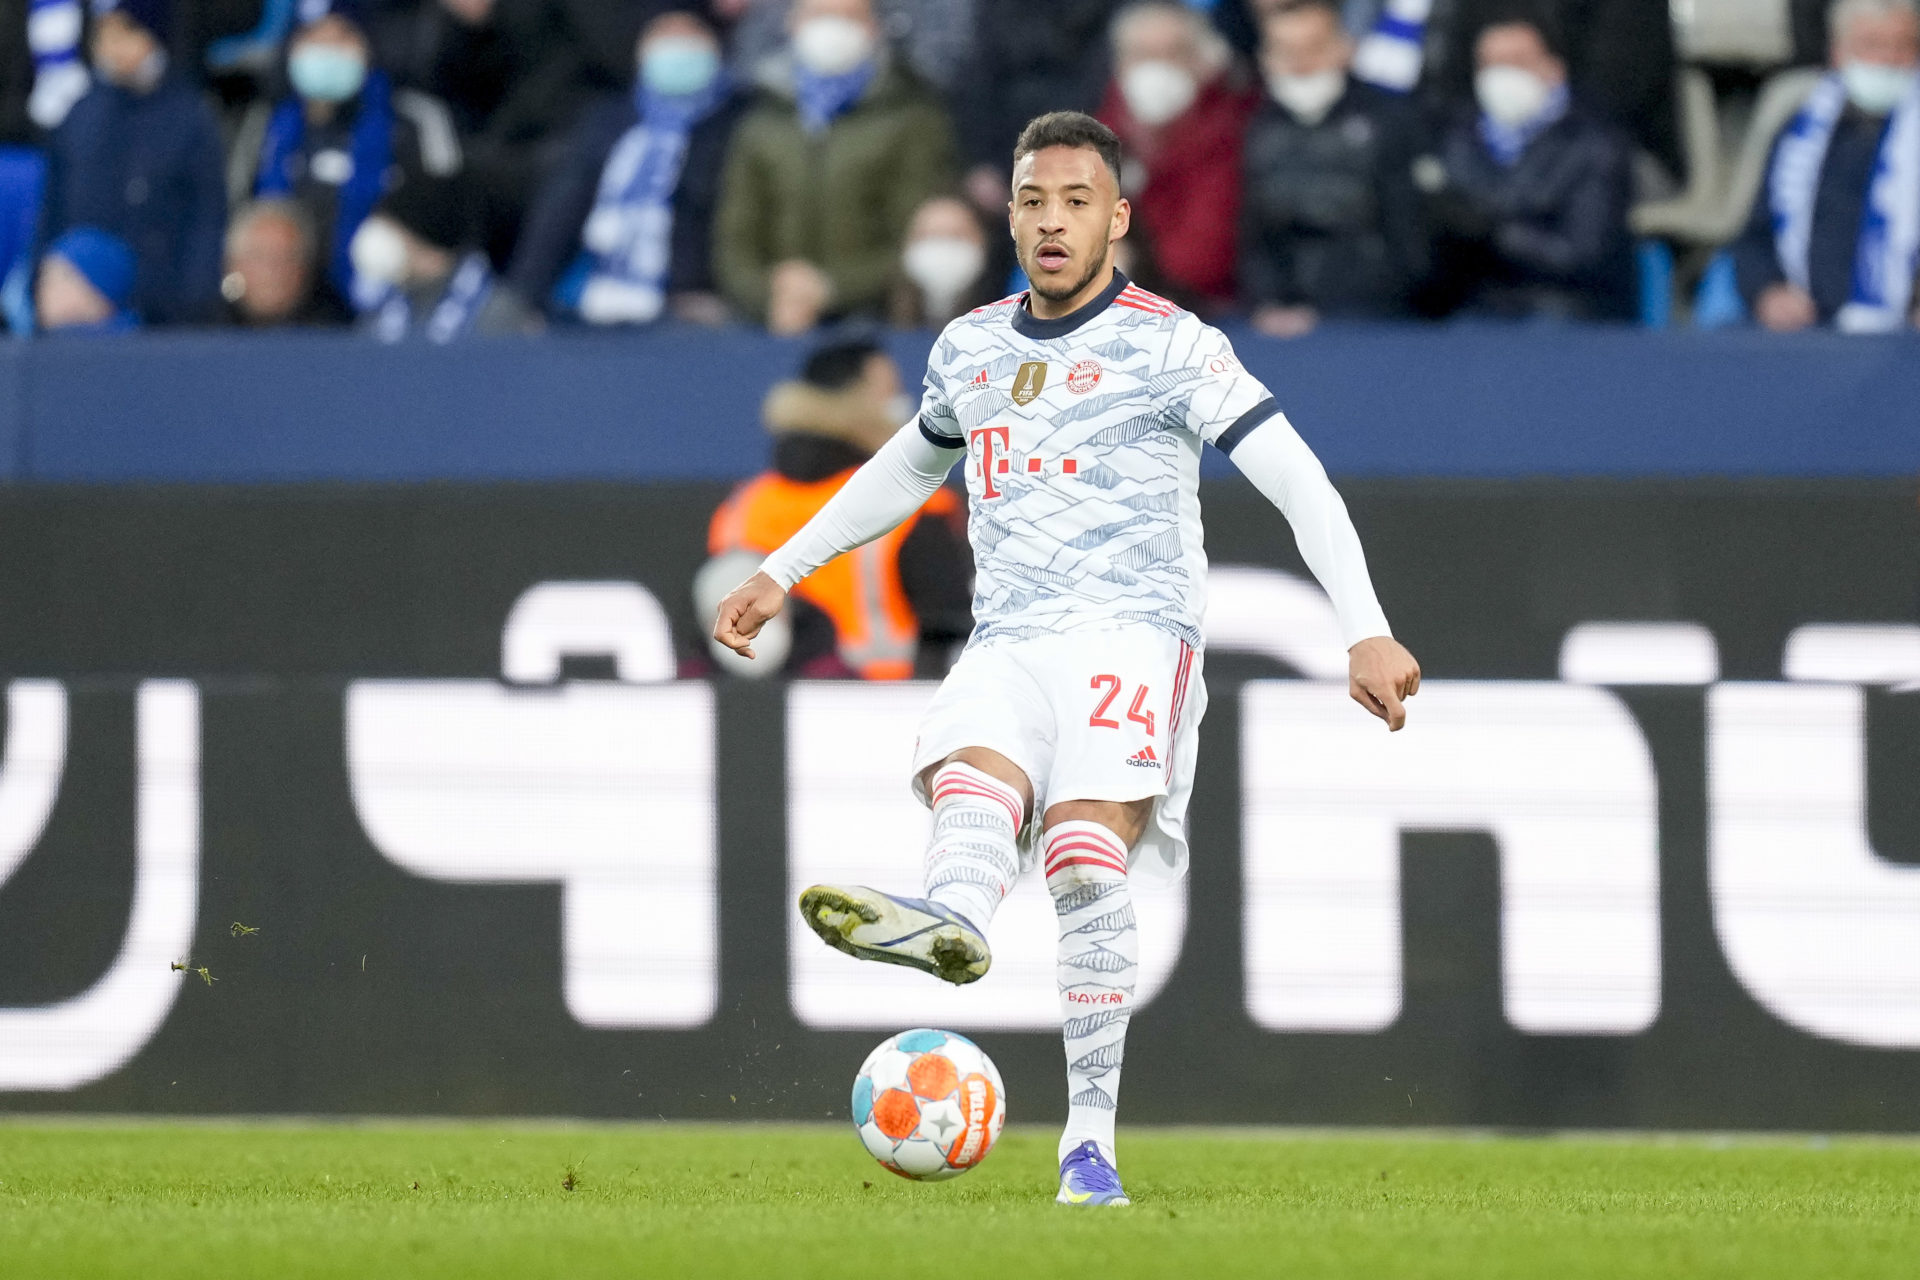 West Ham could now sign Corentin Tolisso on a free transfer